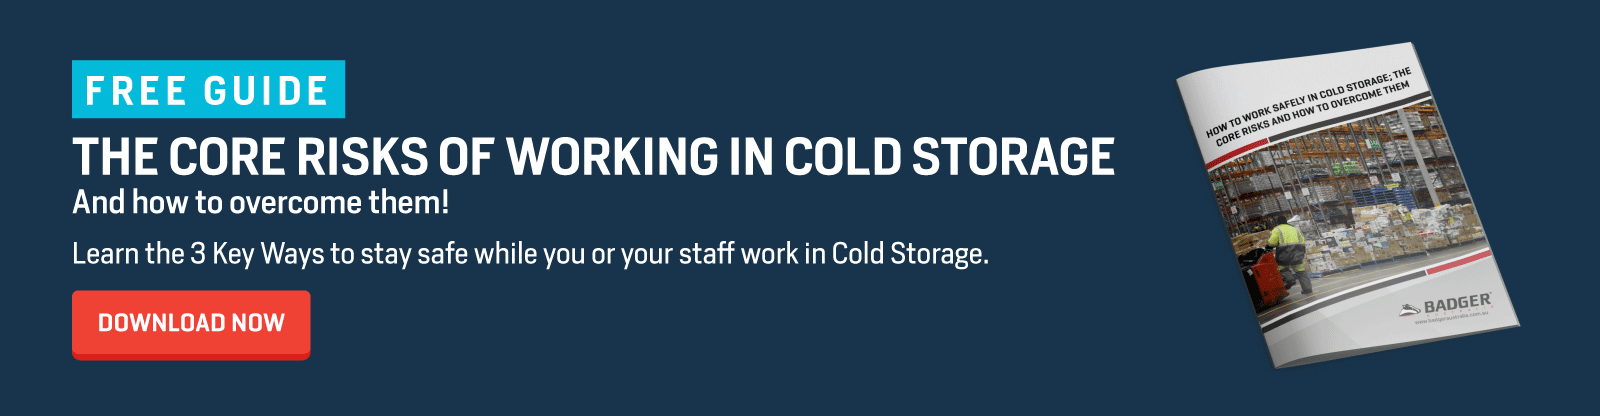 CTA how to stay safe in cold storage